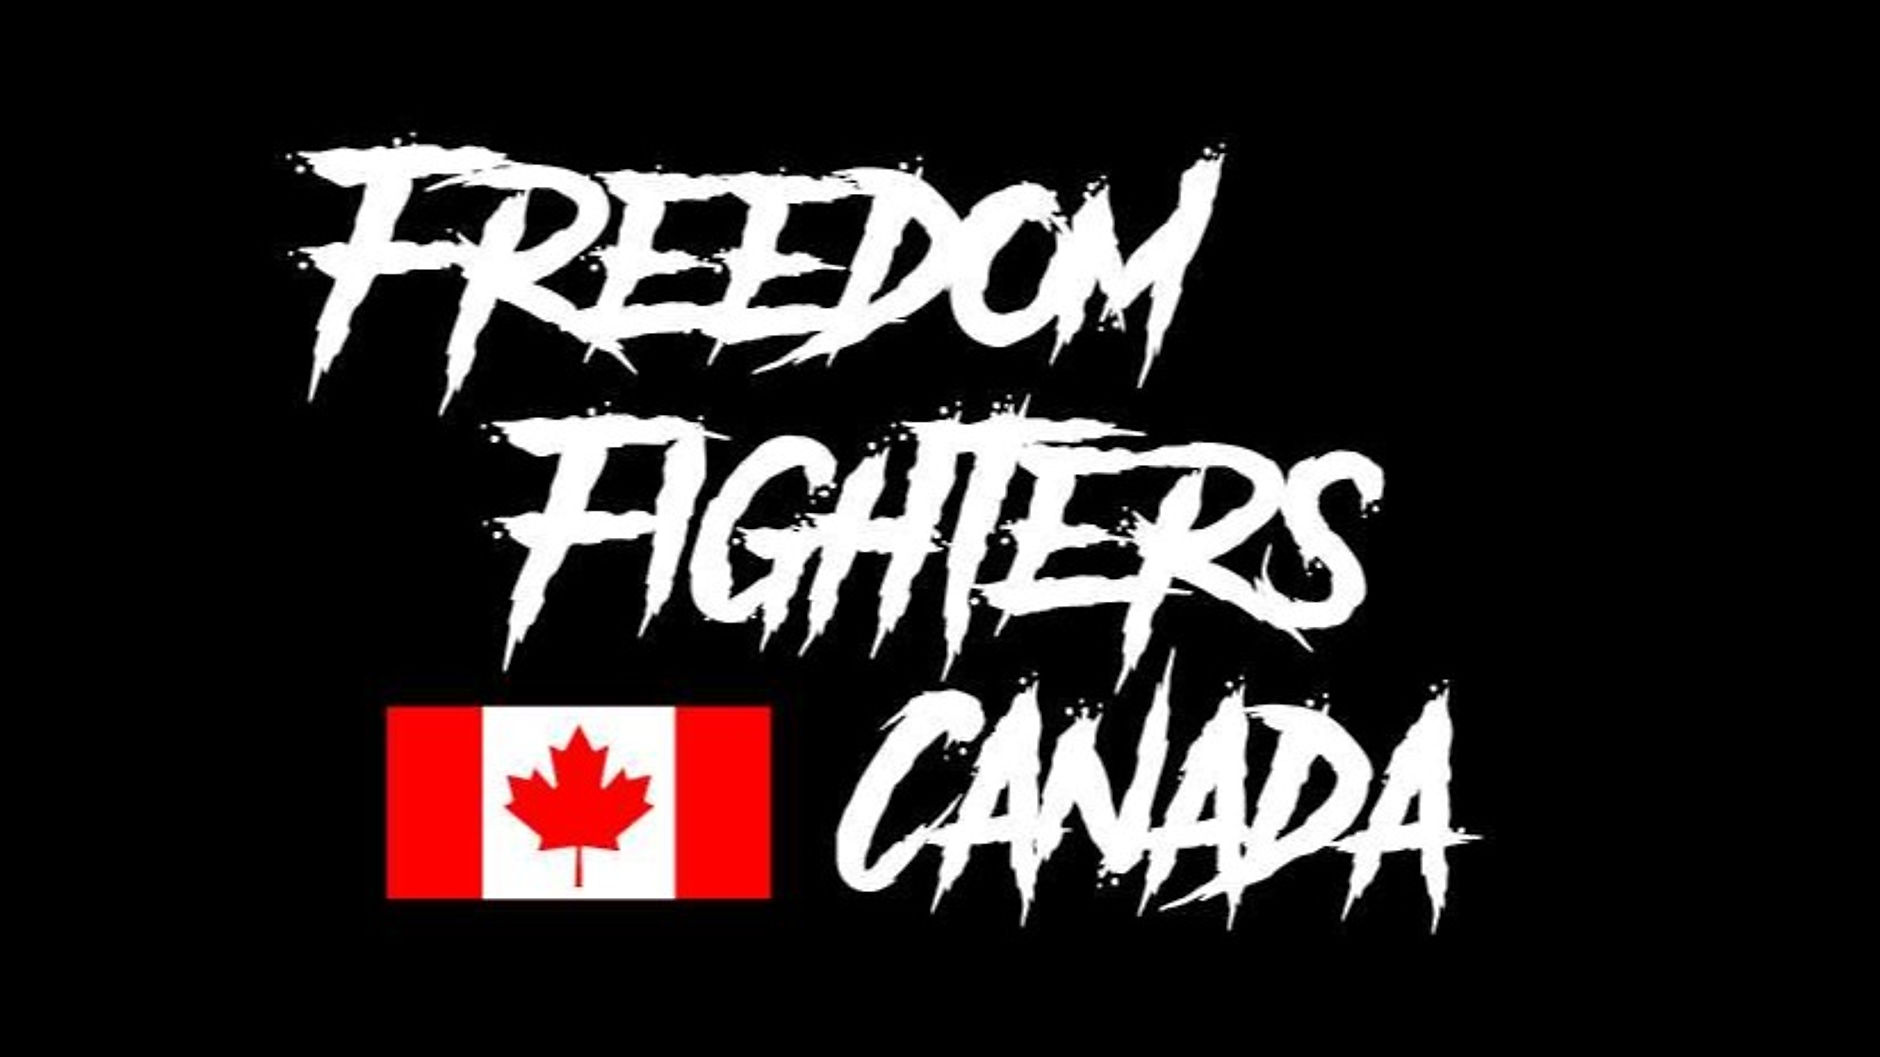 Freedom Fighters Canada